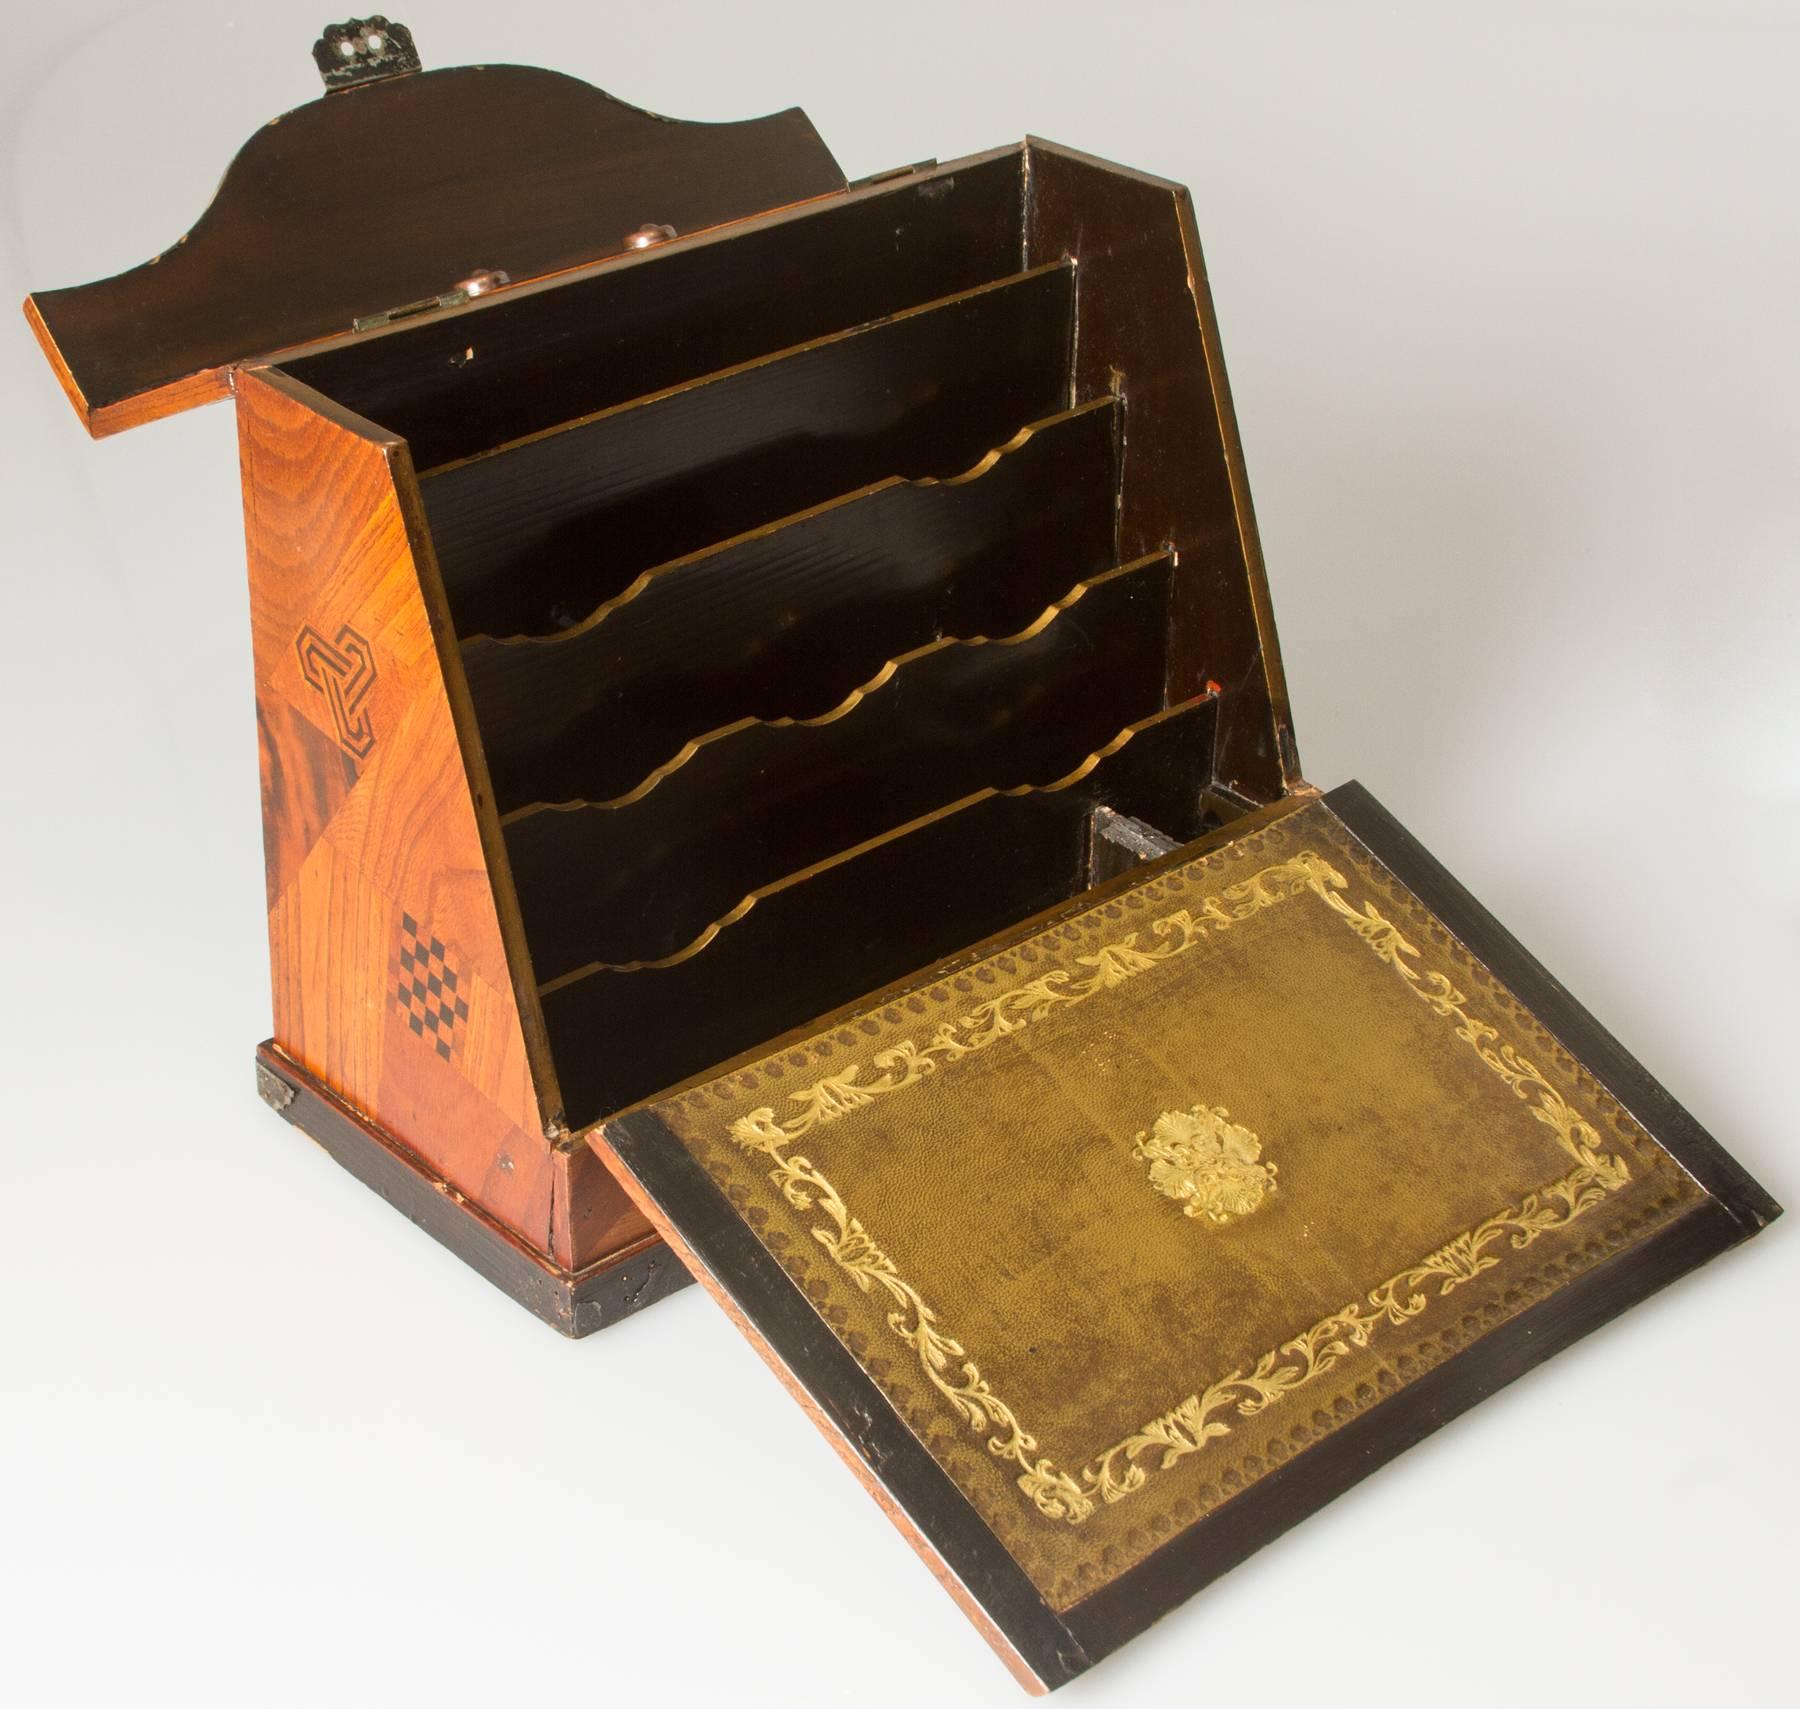 This is a beautiful traveling desk box. The interior contains space for brushes, pens and paper. The box front flips down to reveal a gold embossed leather interior.